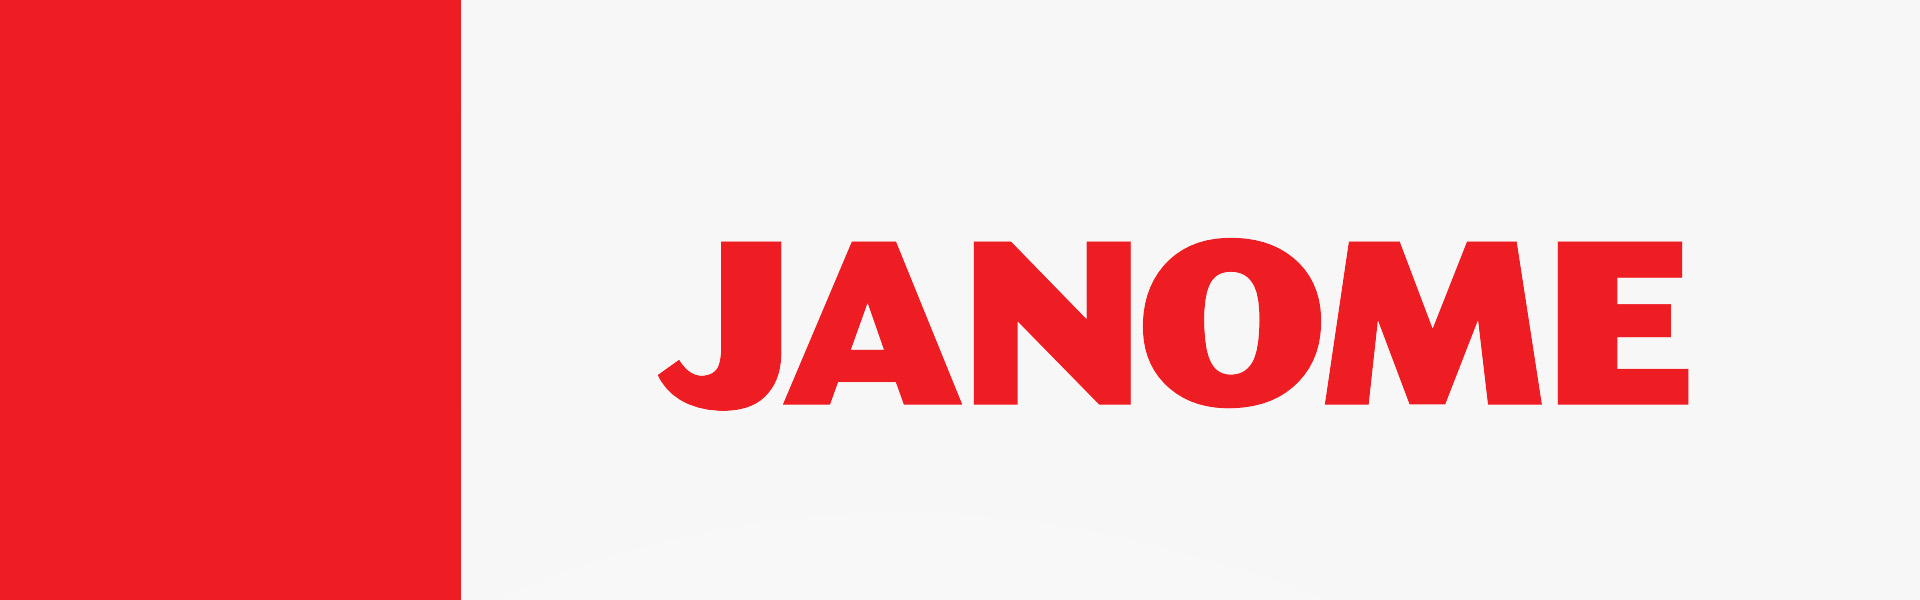 Janome Top18 